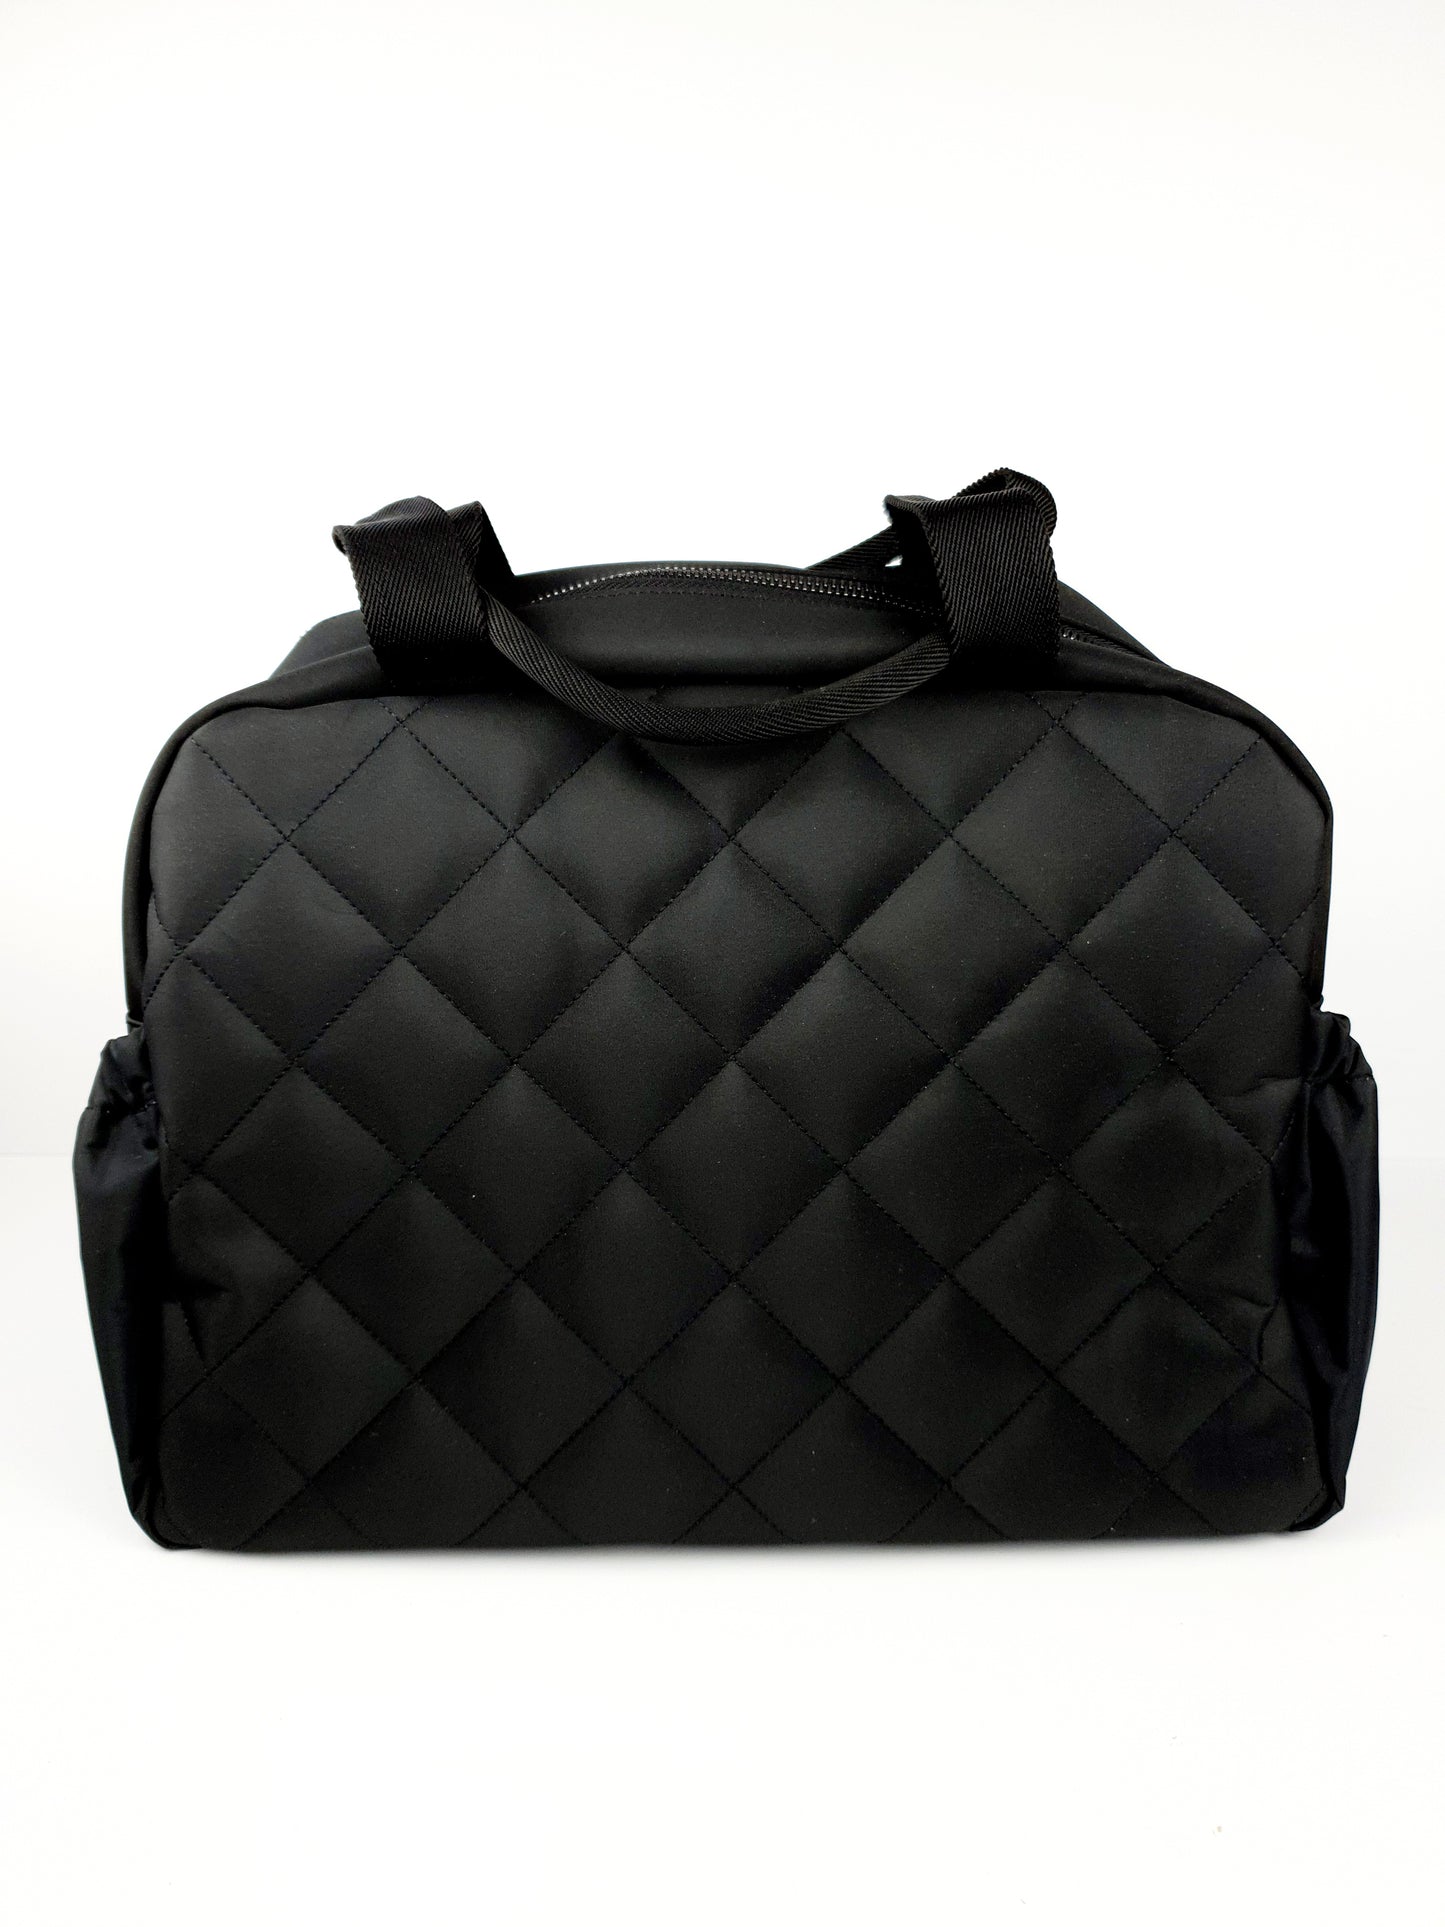 OiOi Baby Changing Bag Black Diamond Quilt